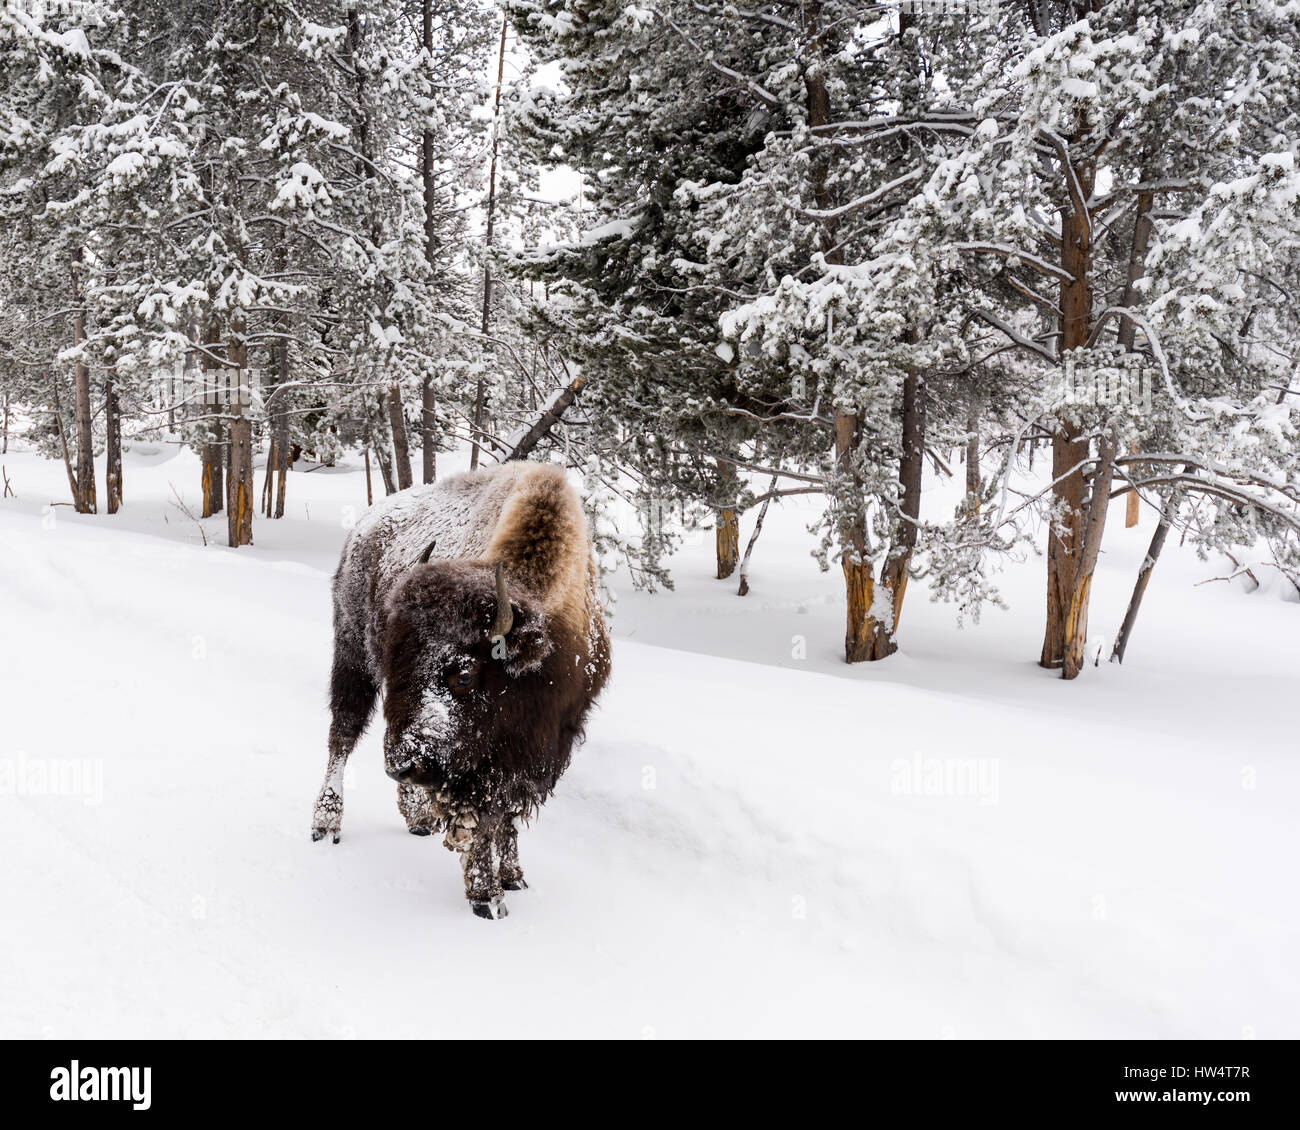 Bison (Bison bison) commonly called Buffalo surviving the brutal winter in Yellowstone National Park, WY, USA. Stock Photo